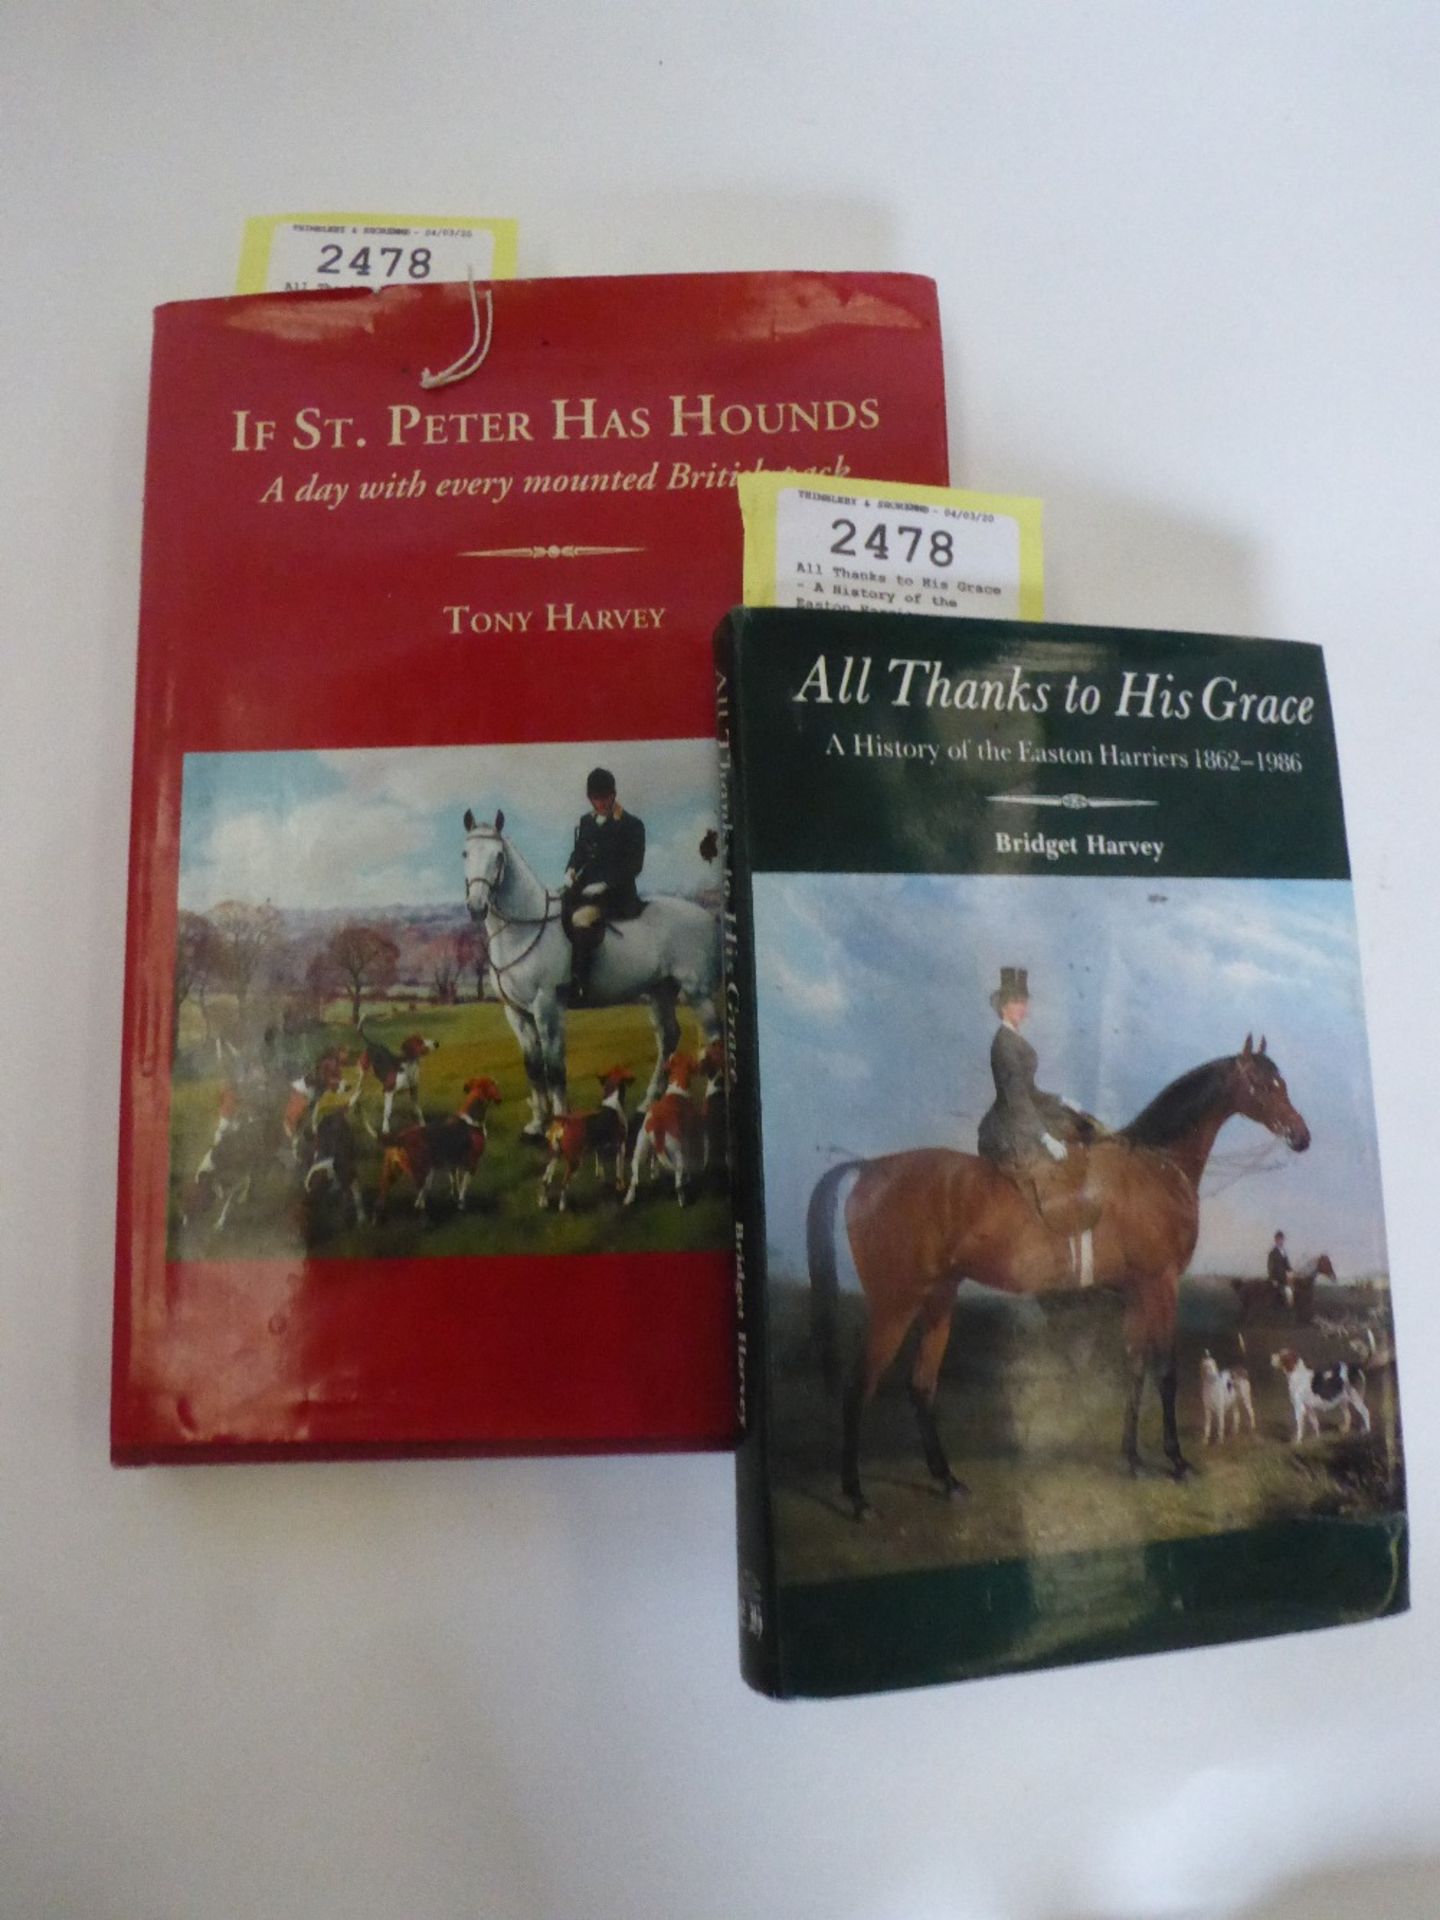 All Thanks to His Grace - A History of the Easton Harriers 1862-1986 and If St.Peter has Hounds by